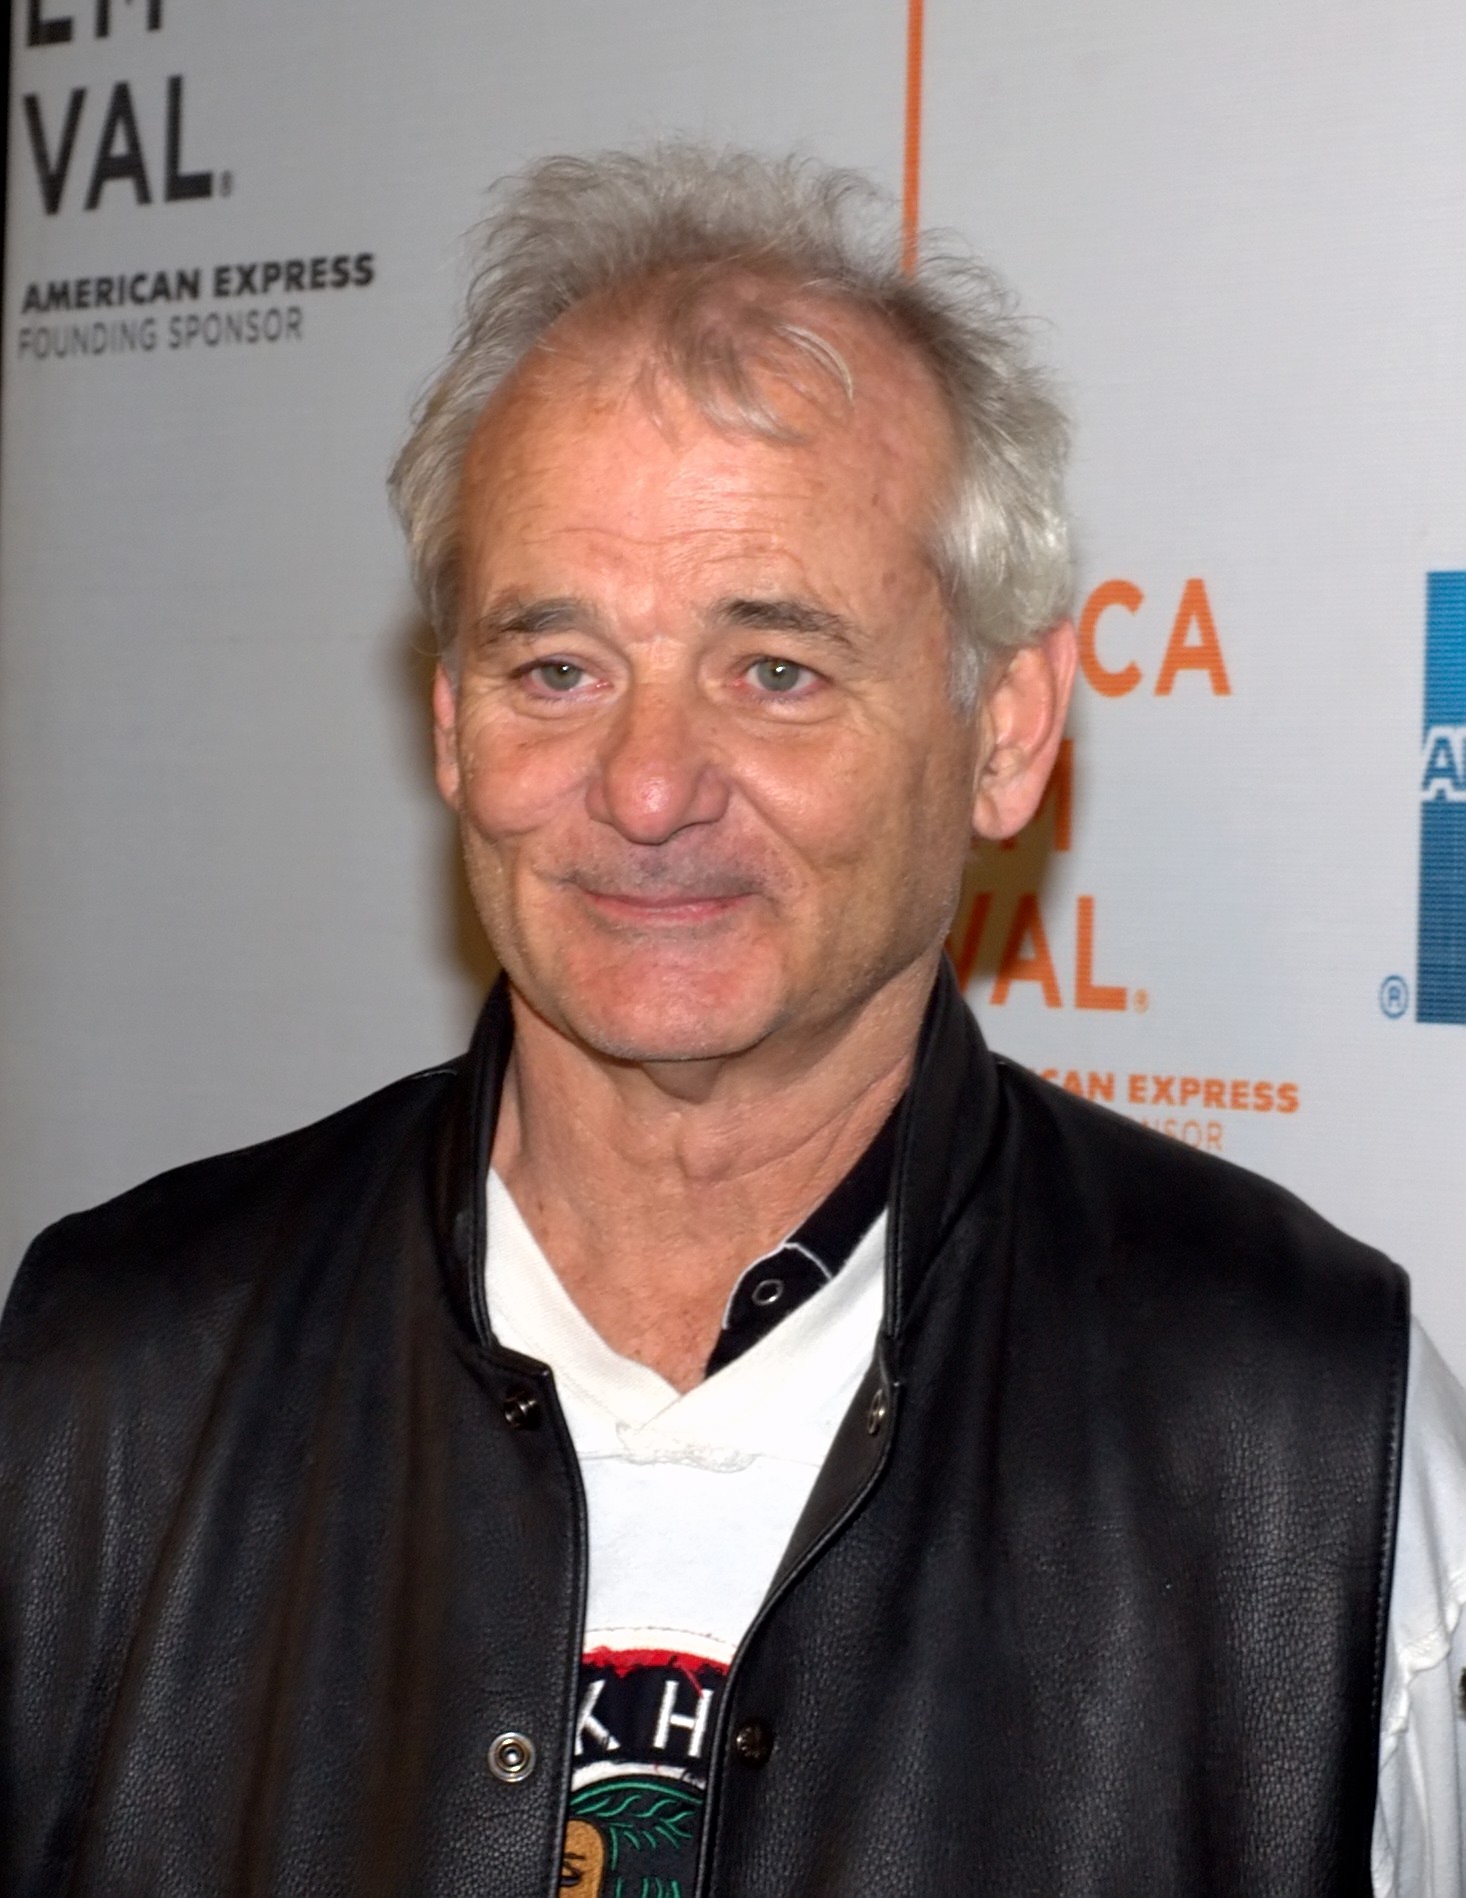 Bill Murray joins Peter Farrelly's comedy series at Quibi